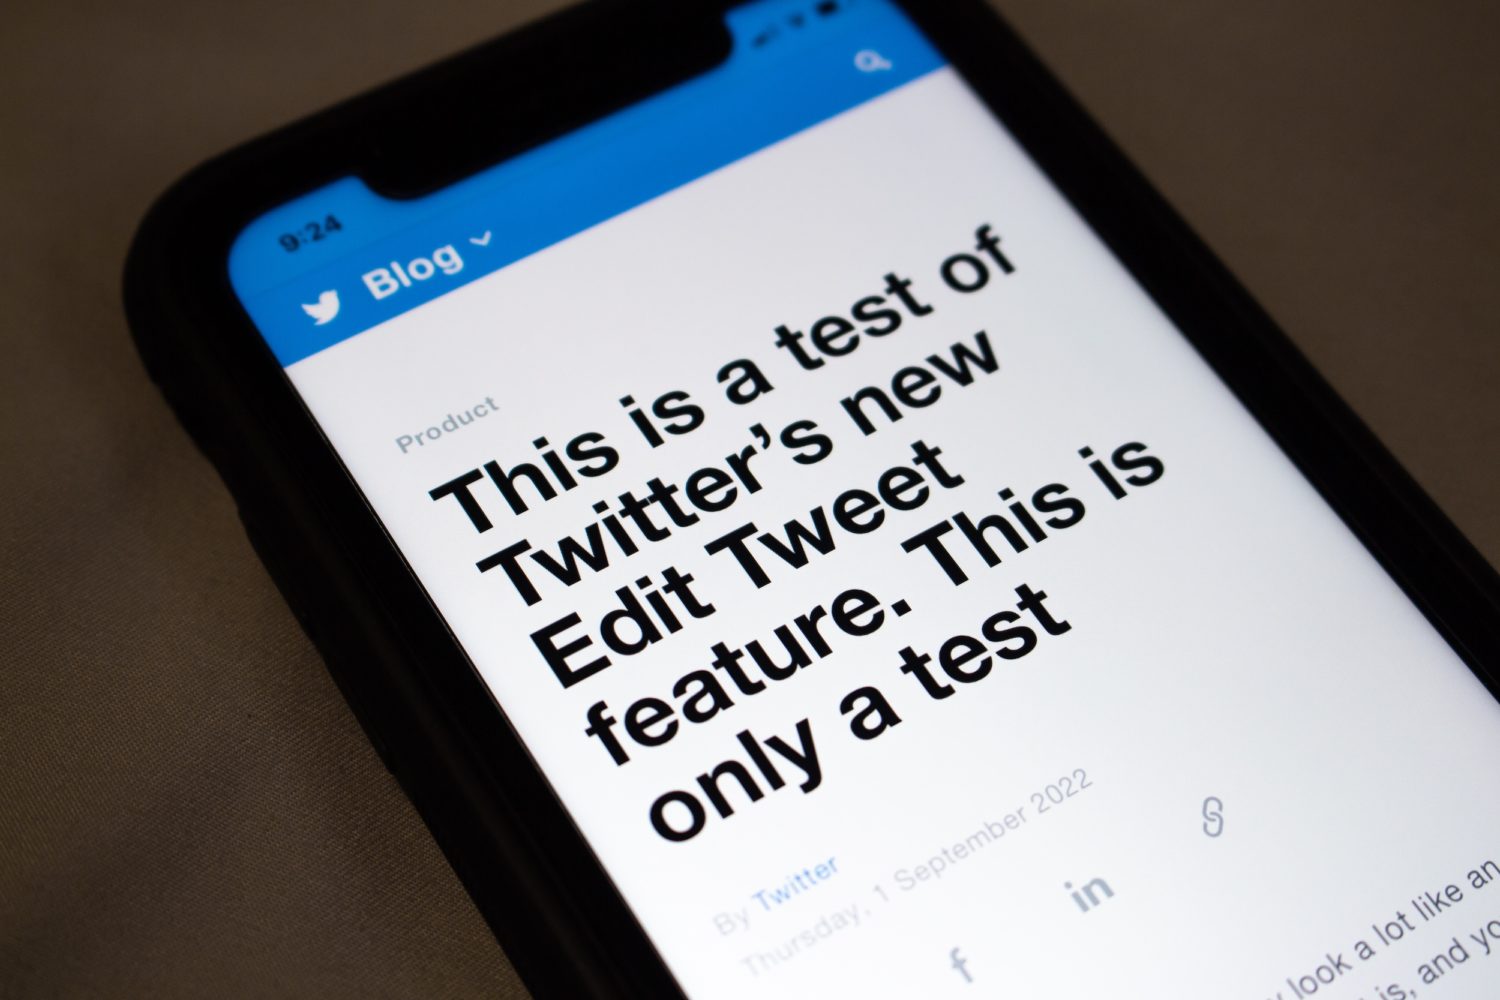 Vancouver, CANADA - Sep 5 2022 : An blog post about Edit Tweet feature from Twitter’s official blog. Twitter announced that “Edit Tweets” option is being tested